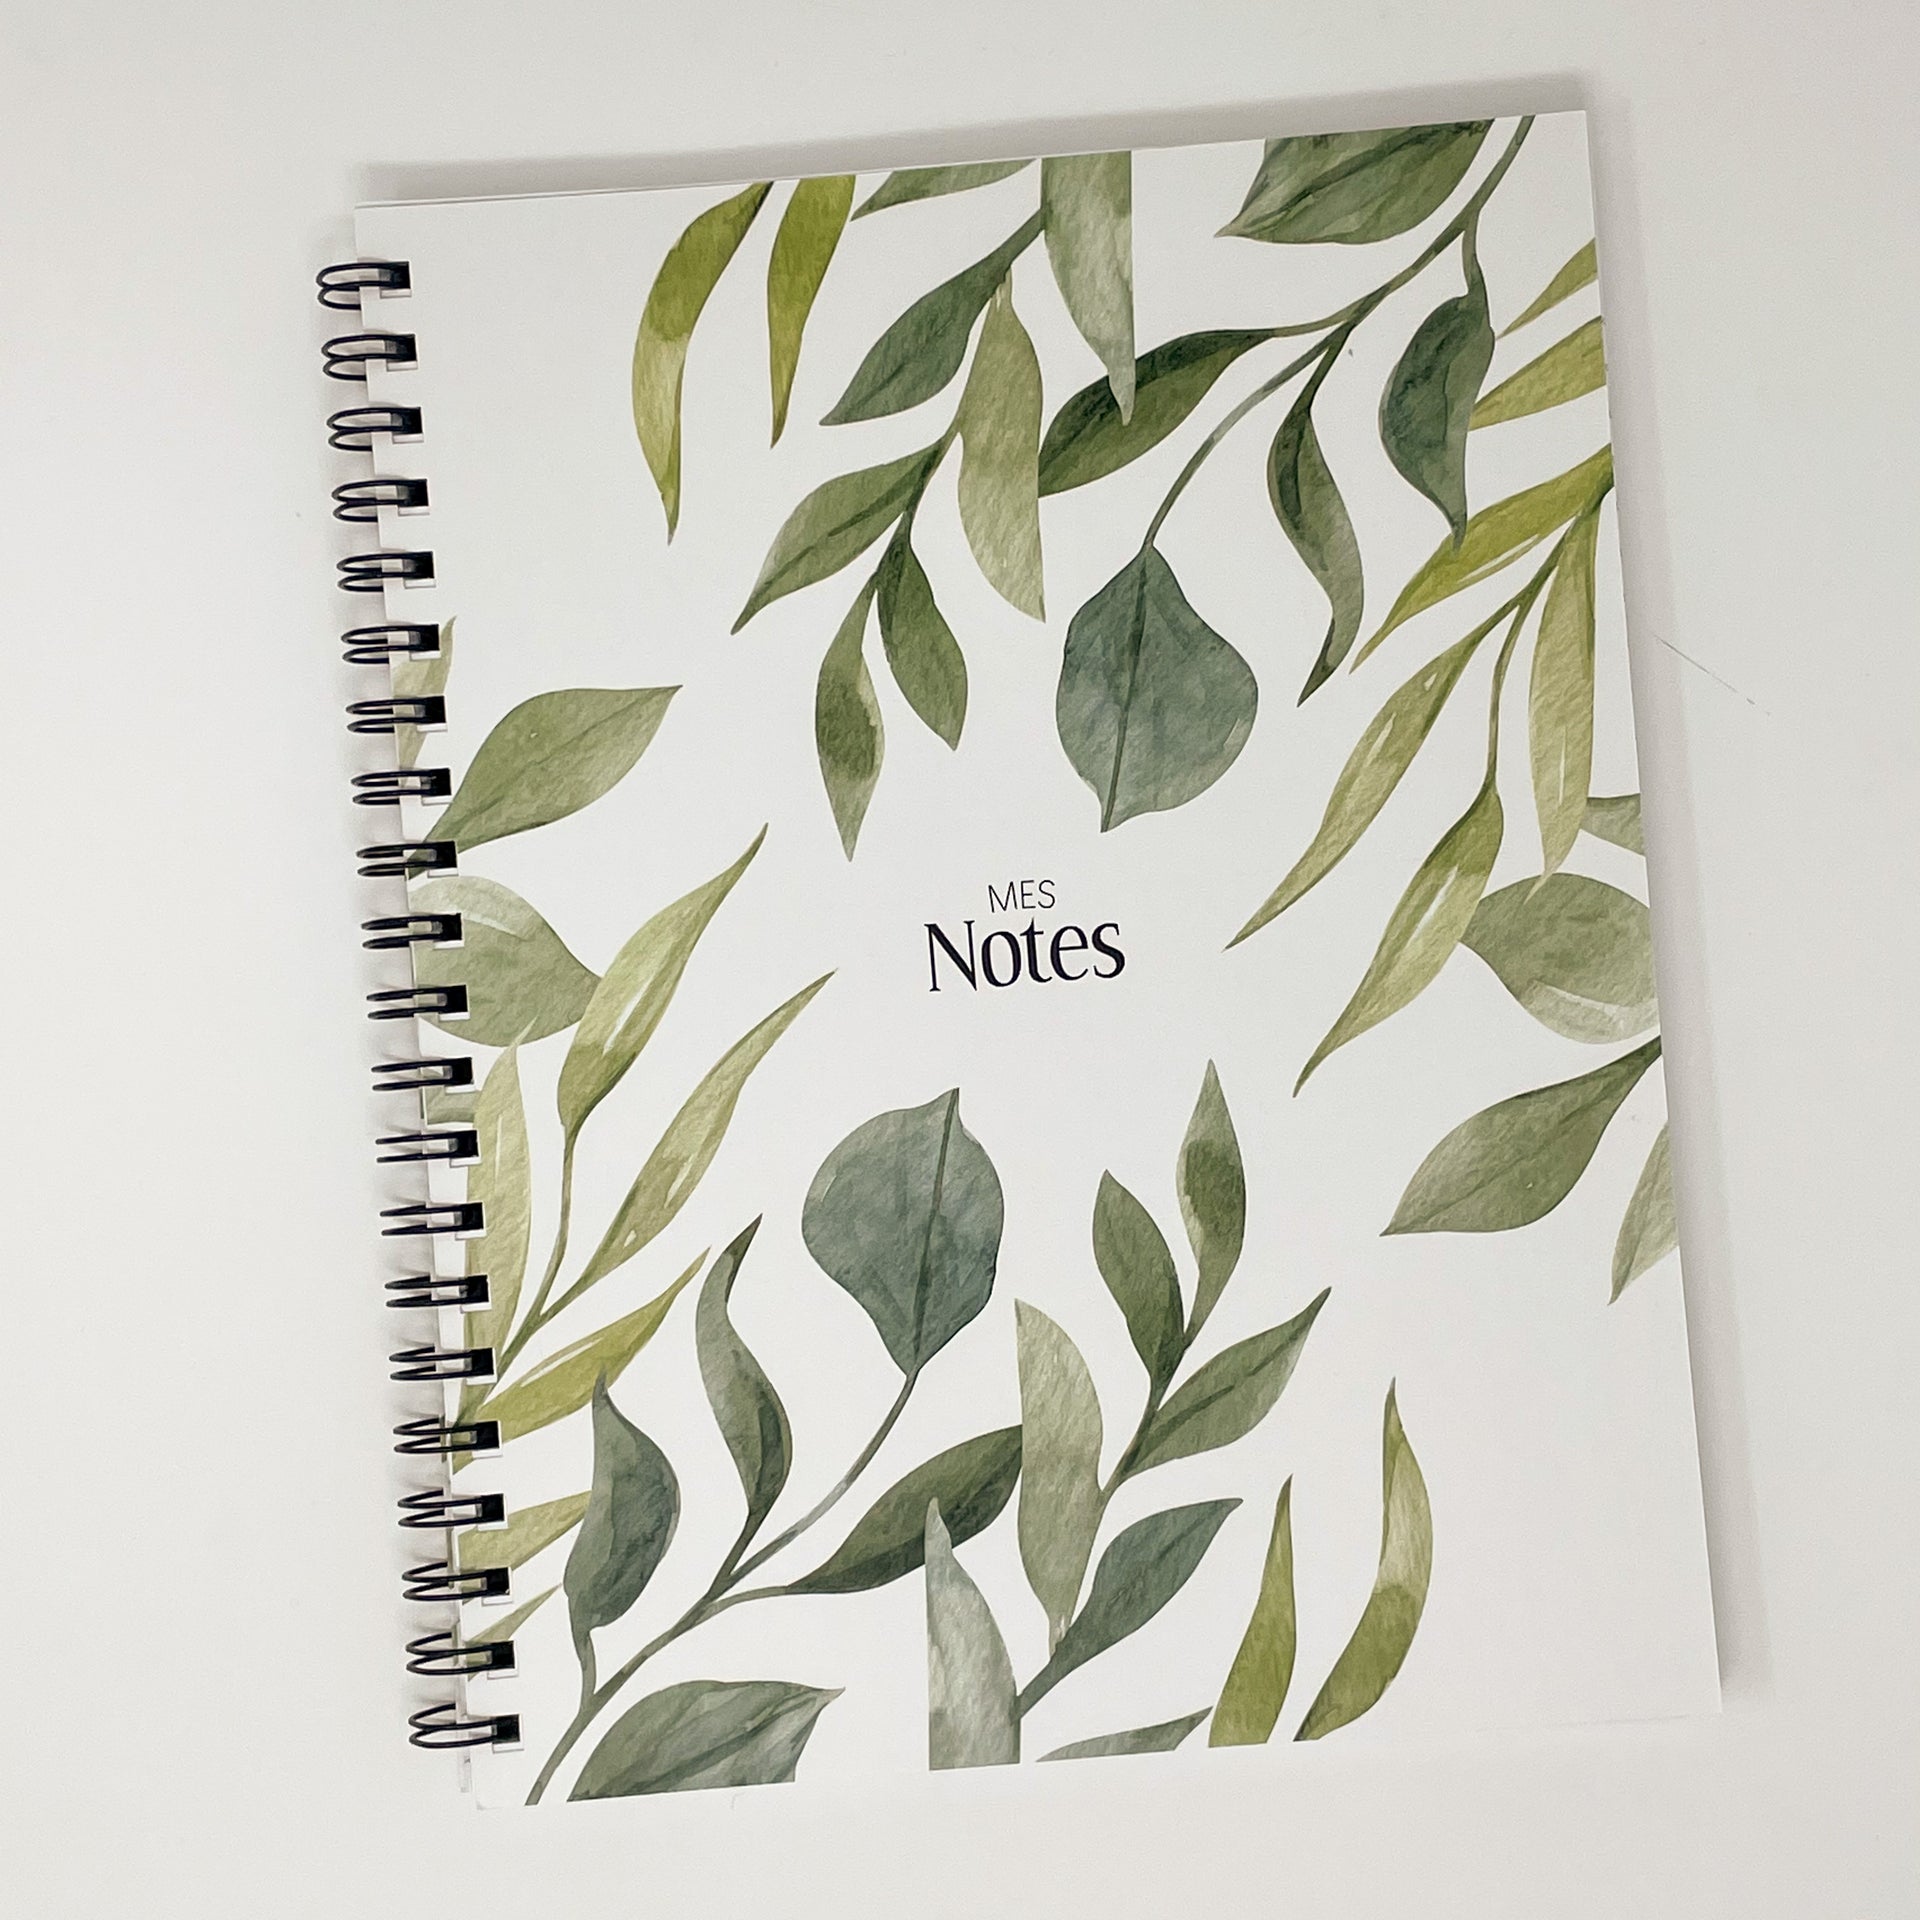 Cahier de notes / Out of the – Valorise